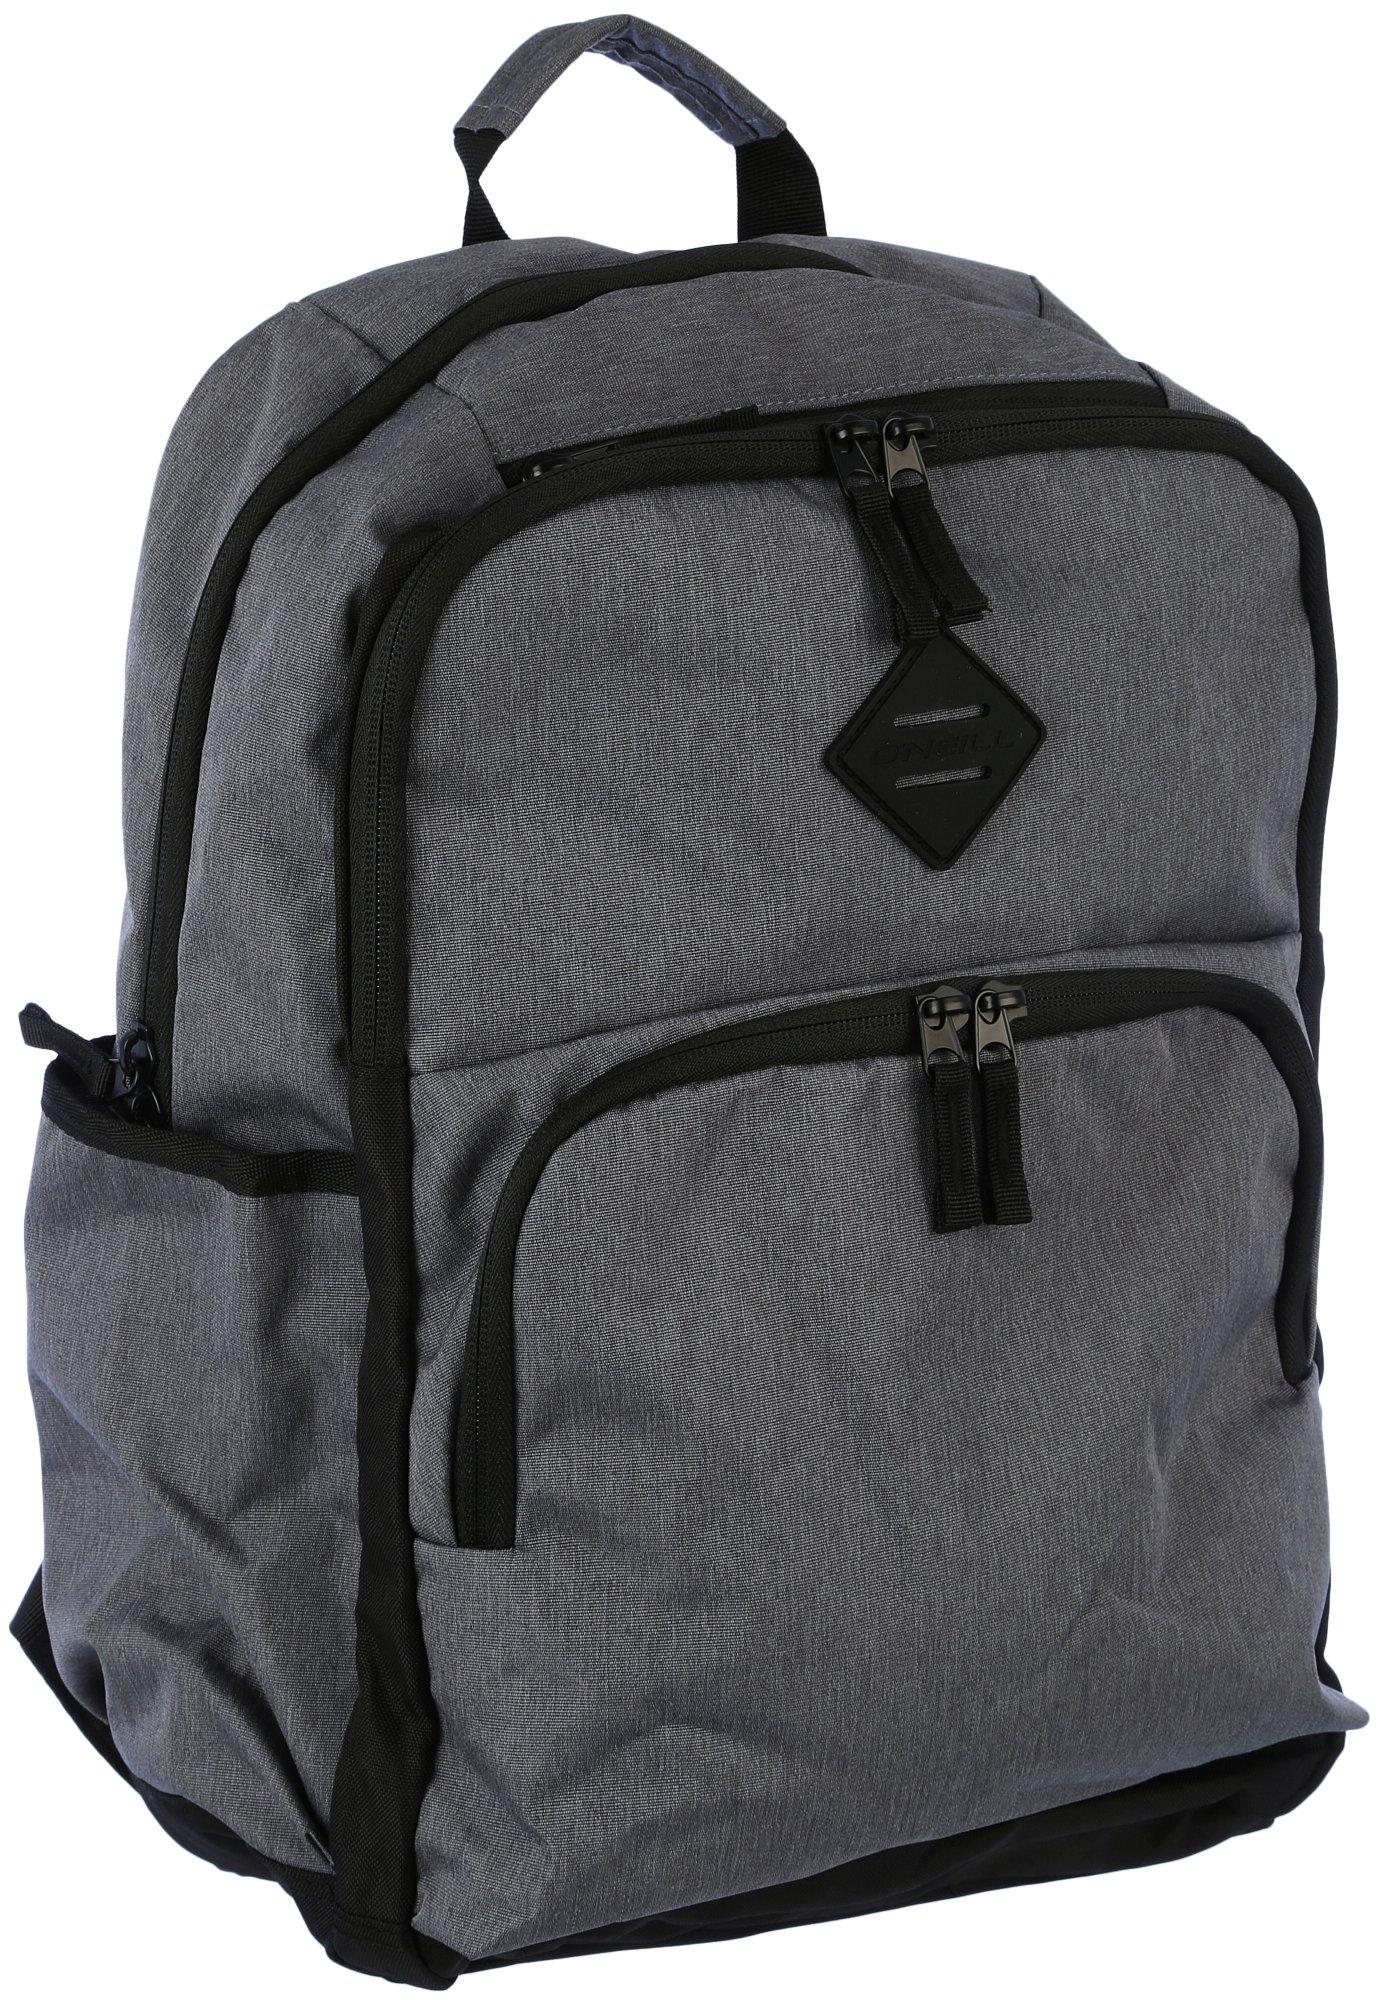 Poly Canvas School Bag Backpack